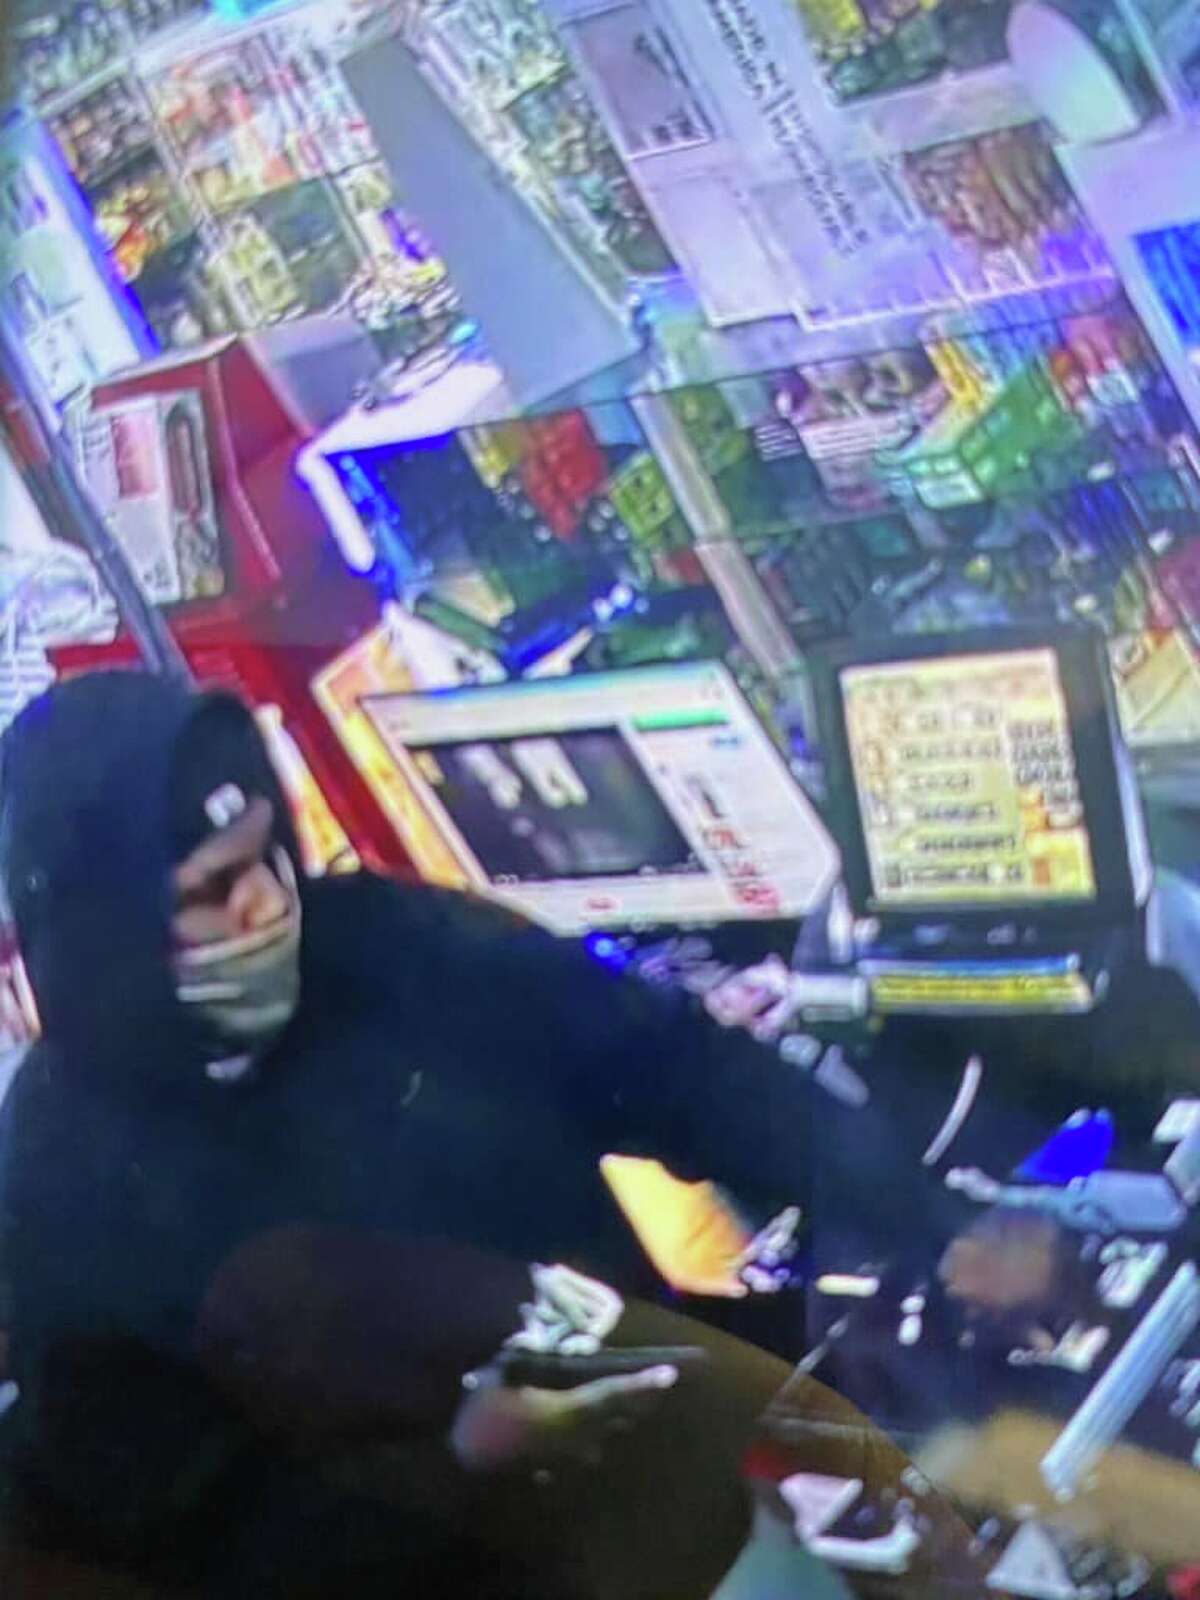 Trumbull police seek help identifying gas station robbery suspects